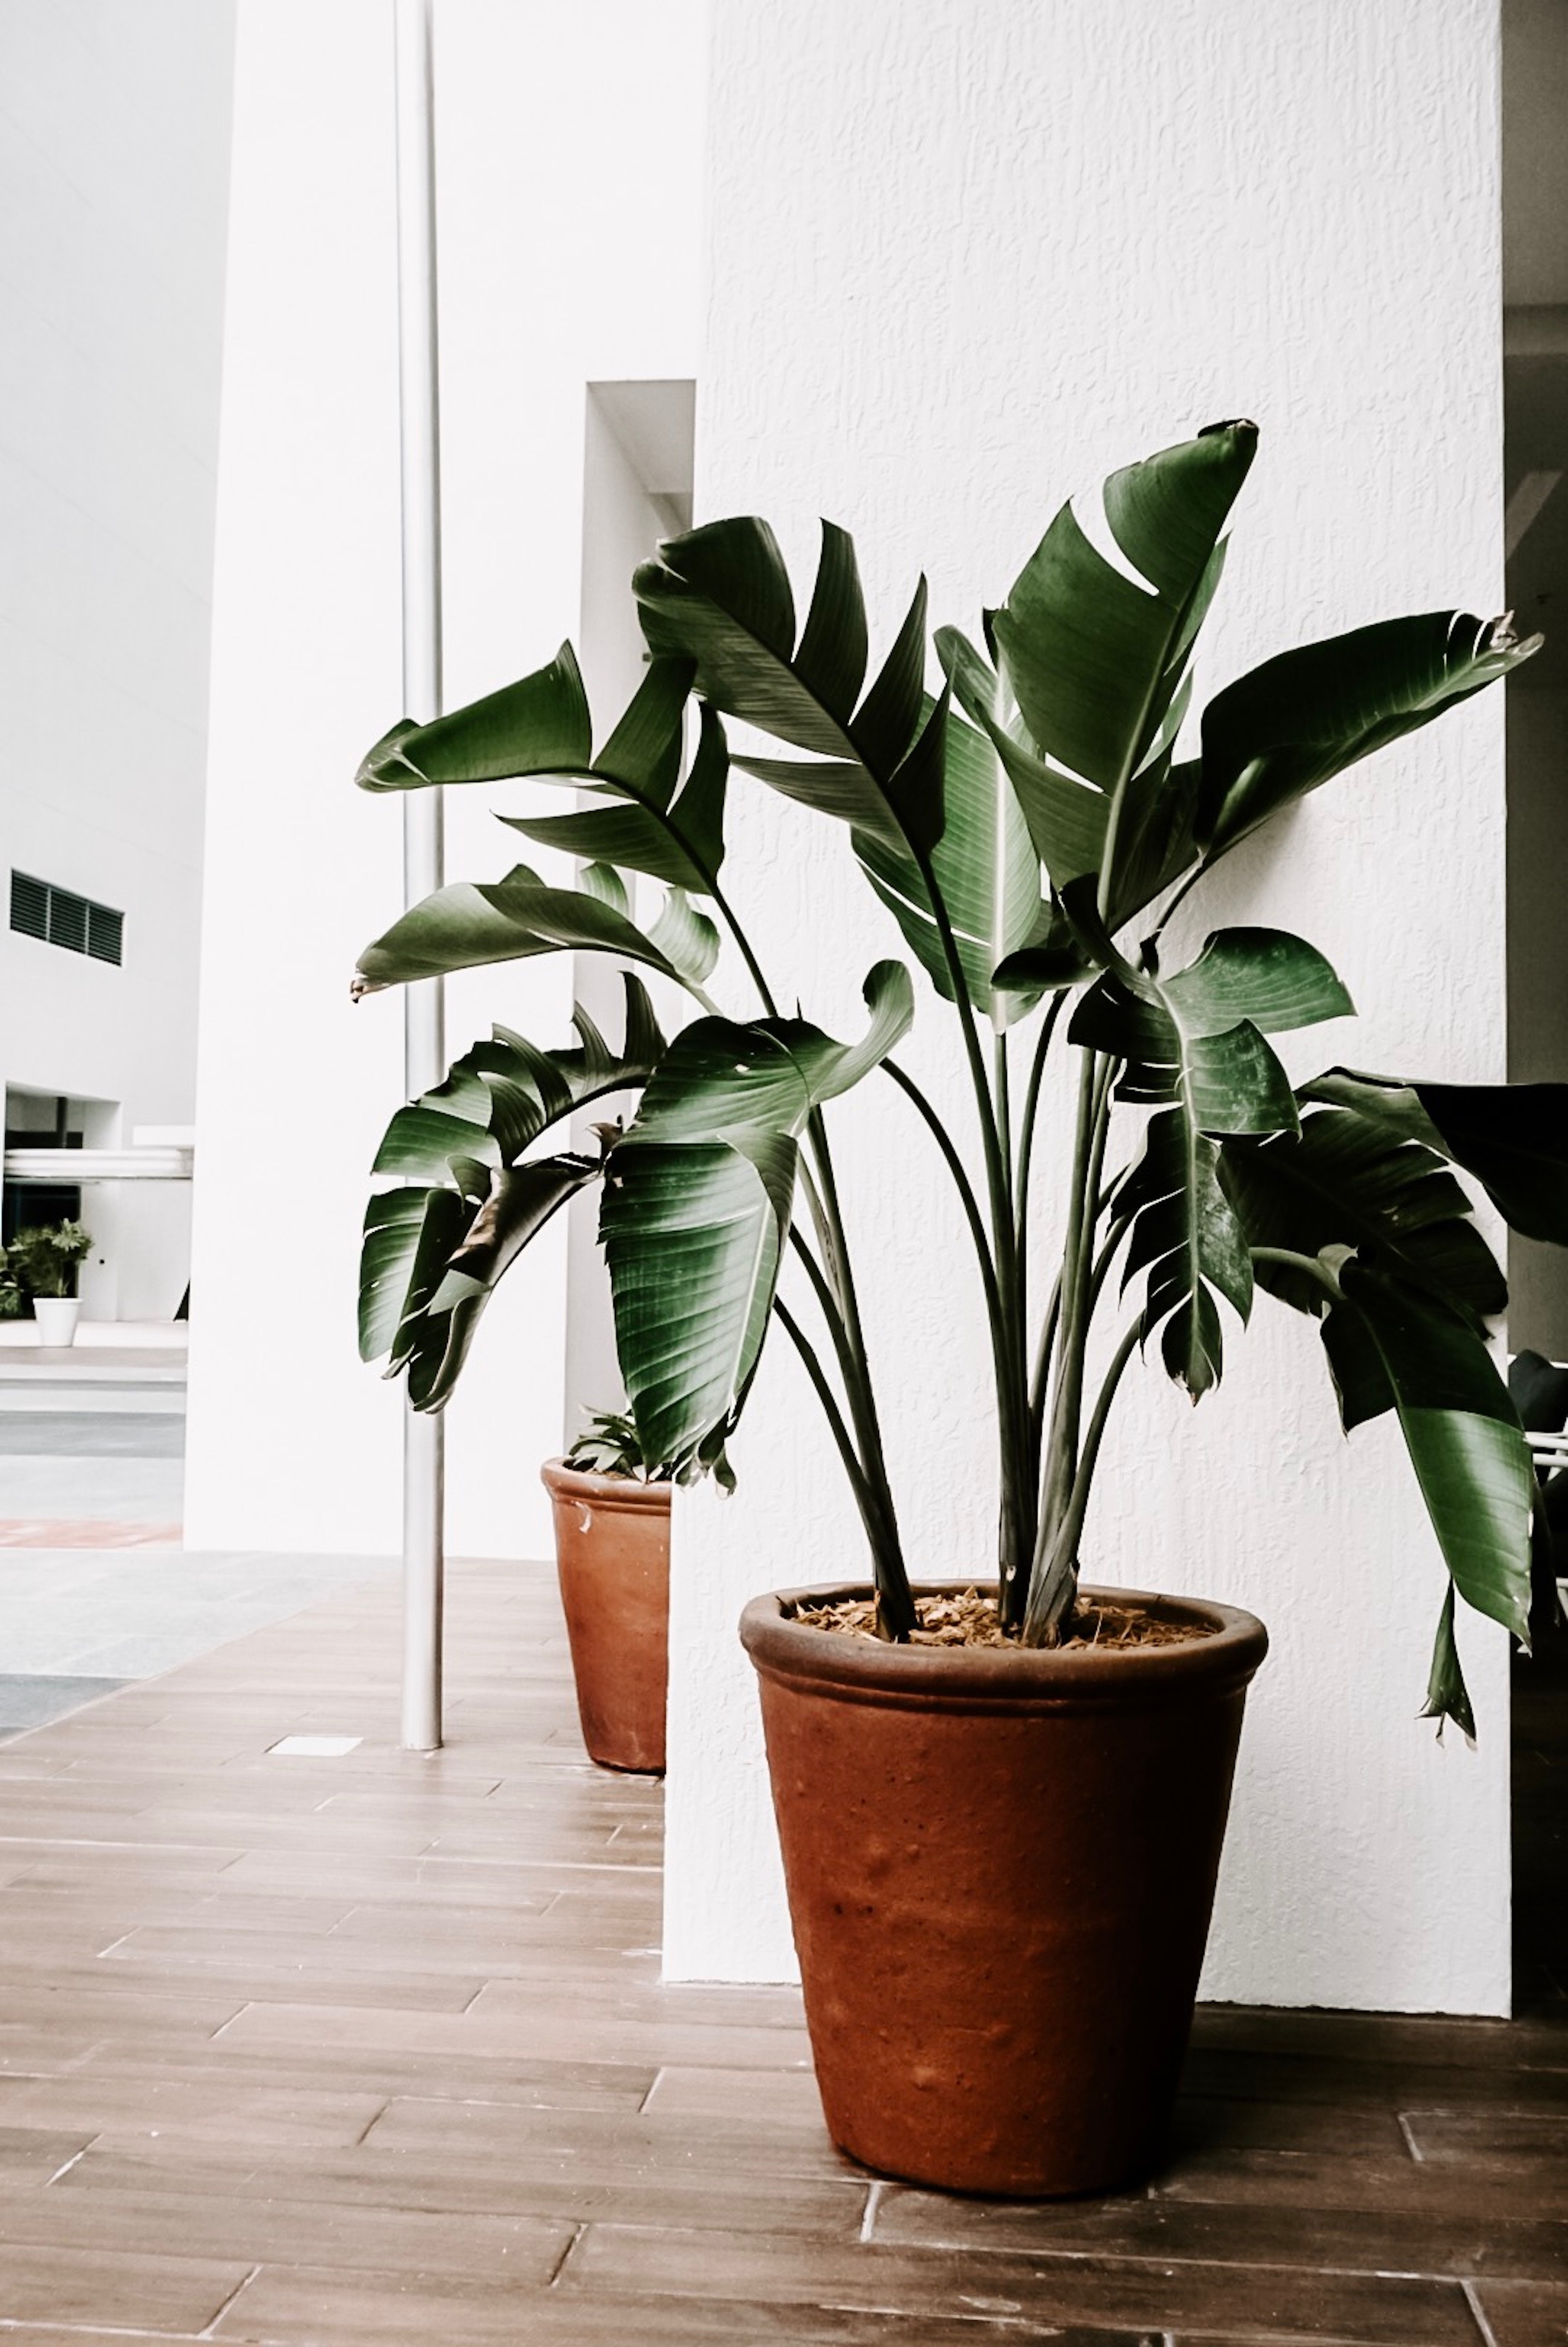 Bring Your Garden Inside! Top Products for Indoor Plant Care